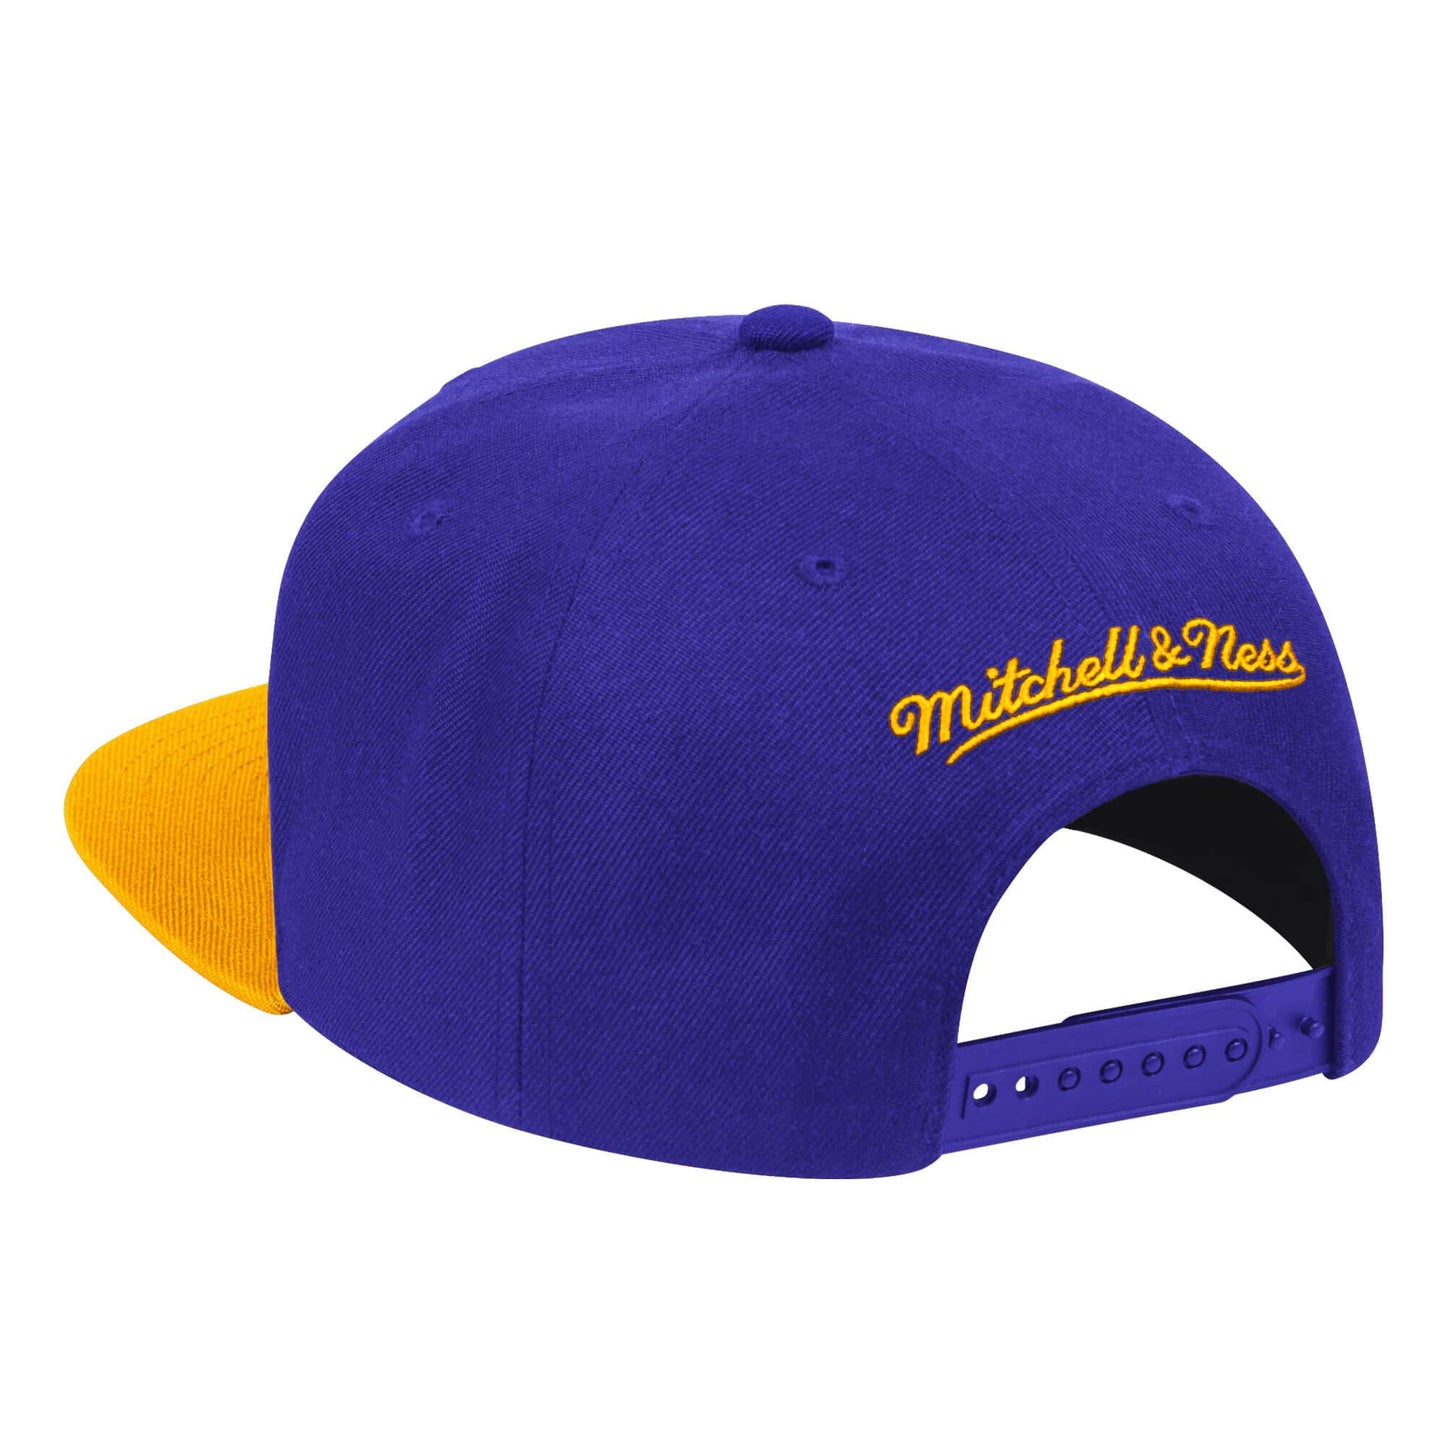 Mens NBA Los Angeles Lakers Purple/Gold Wool 2 Tone Snapback Hat By Mitchell And Ness